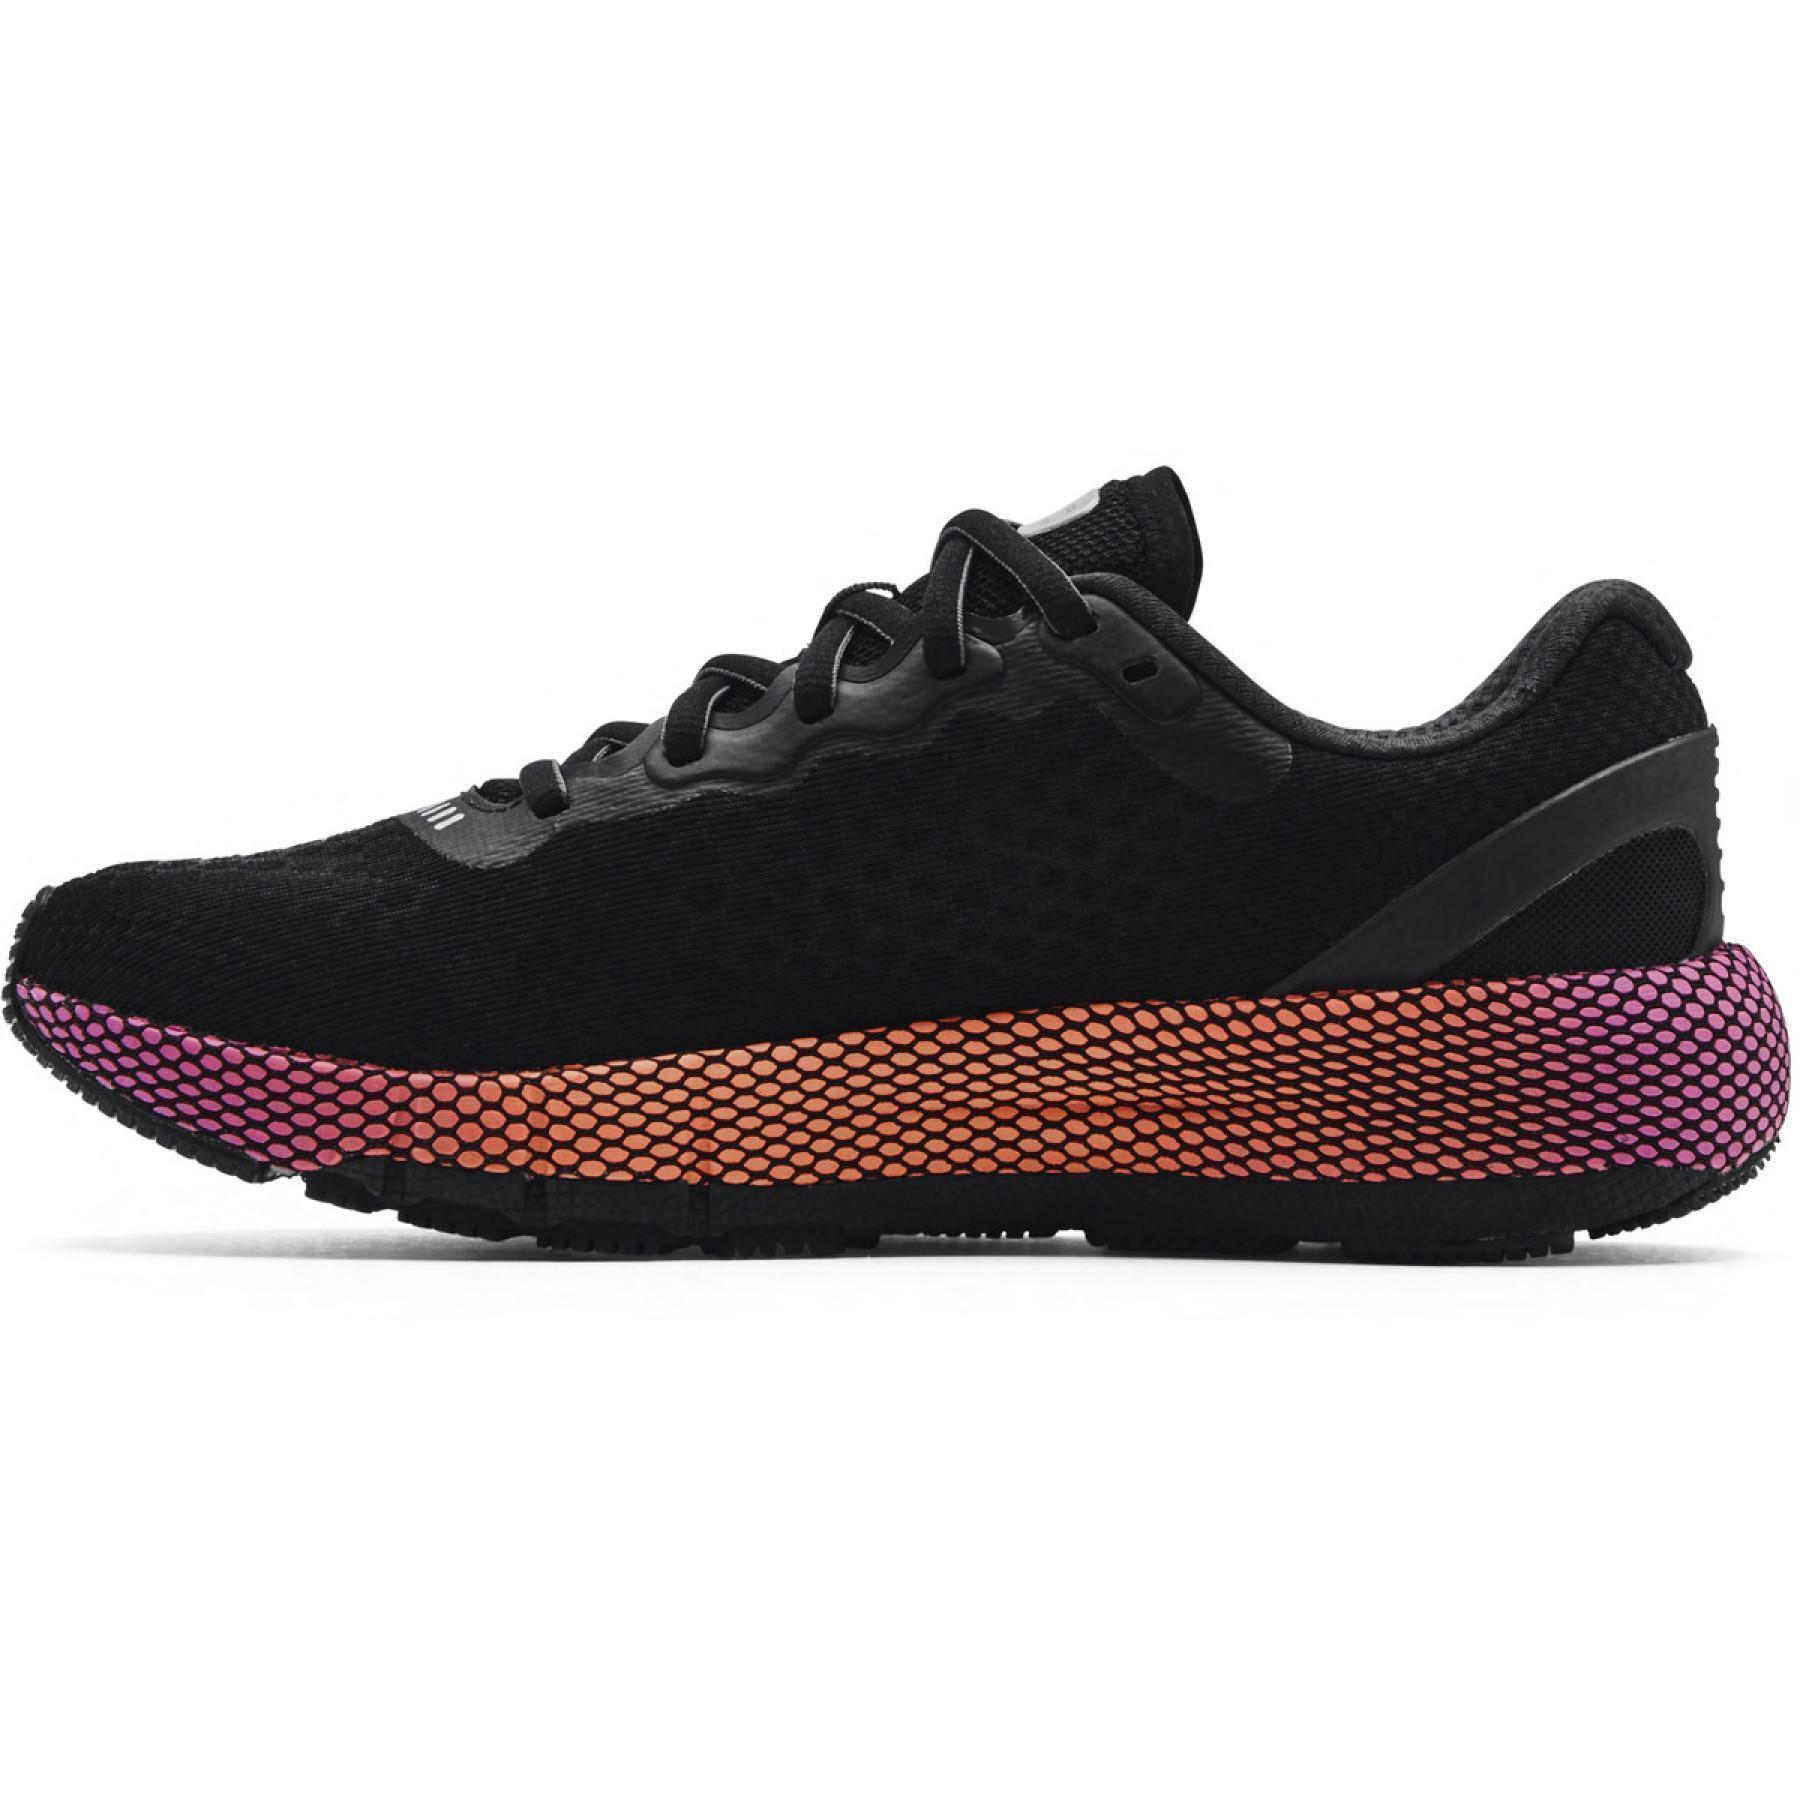 Chaussures de running femme Under Armour HOVR Machina 2 Colorshift